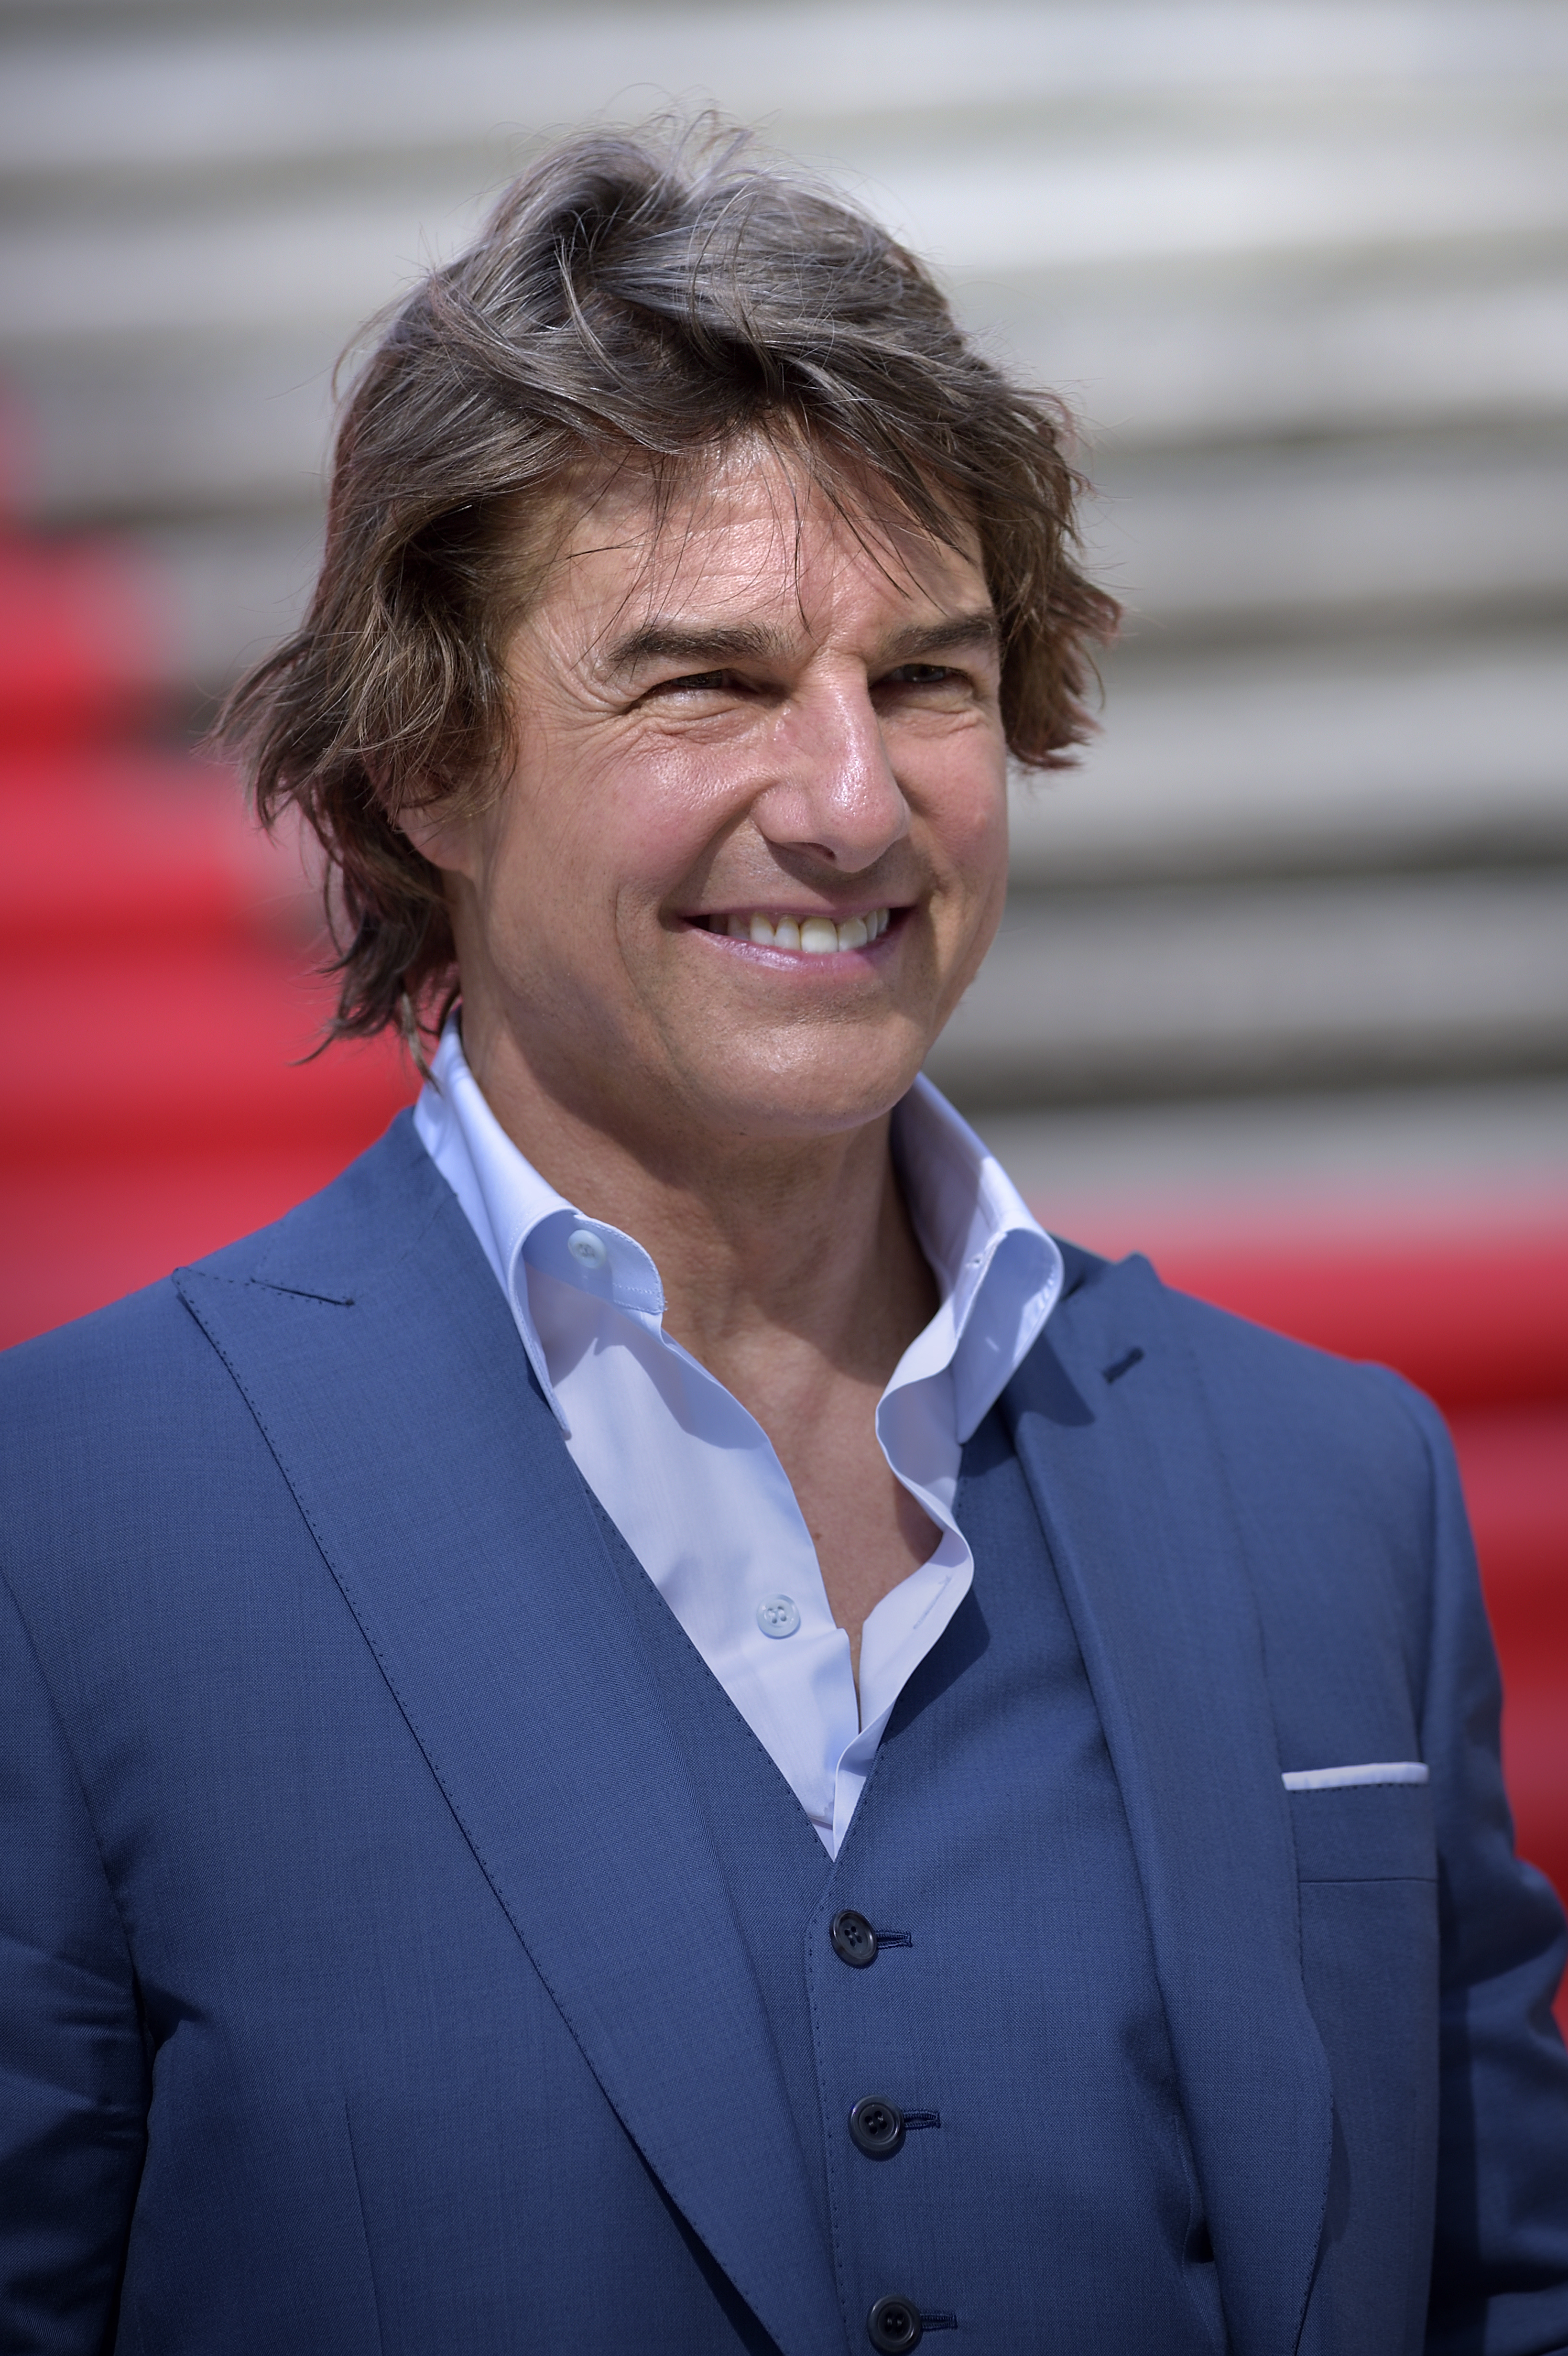 Tom Cruise at the premiere of the film "Mission Impossible Dead Reckoning" on June 19, 2023 | Source: Getty Images